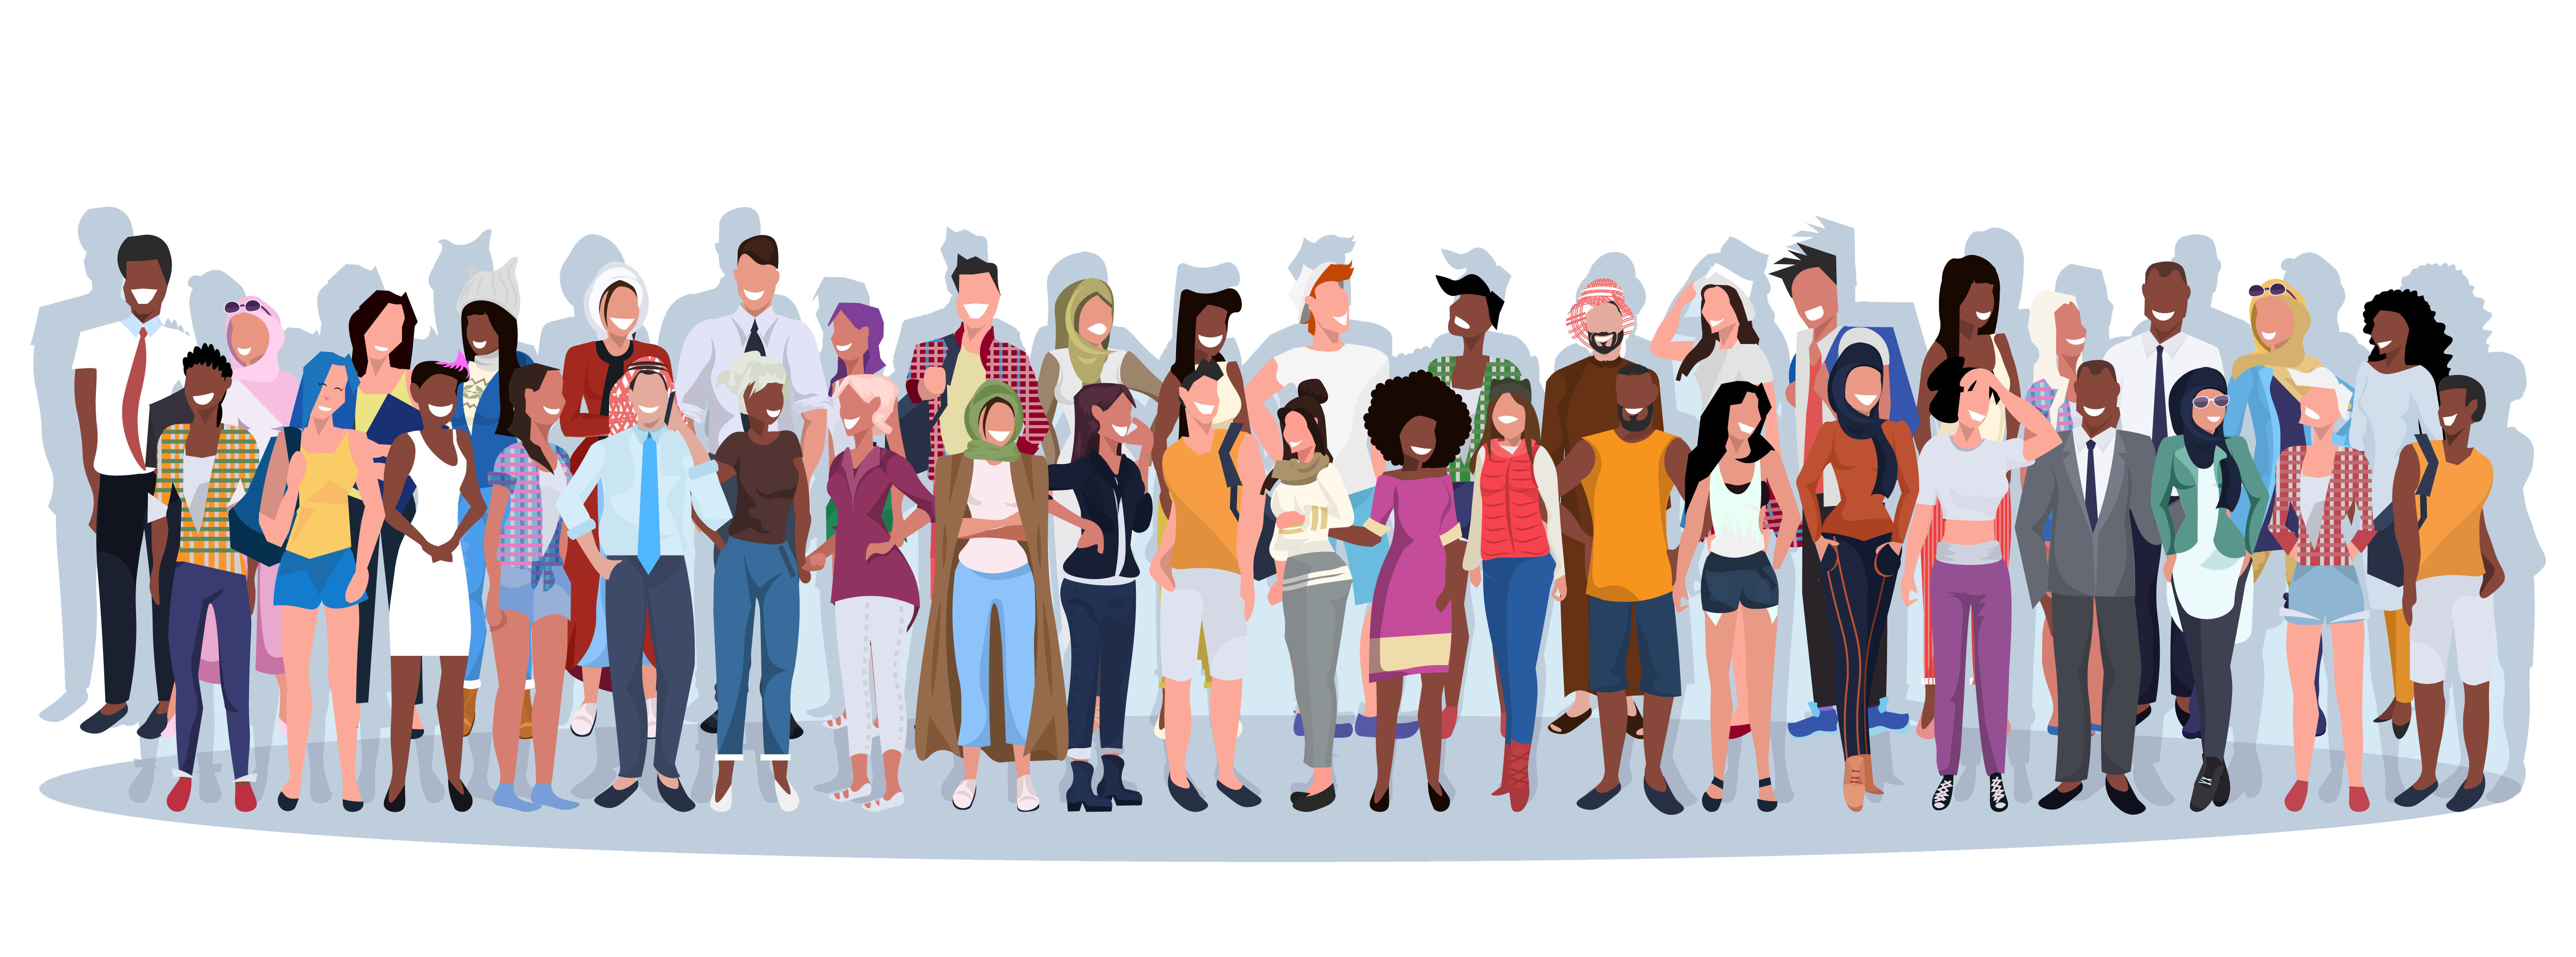 Illustration to show a diverse group of customers for segmentation